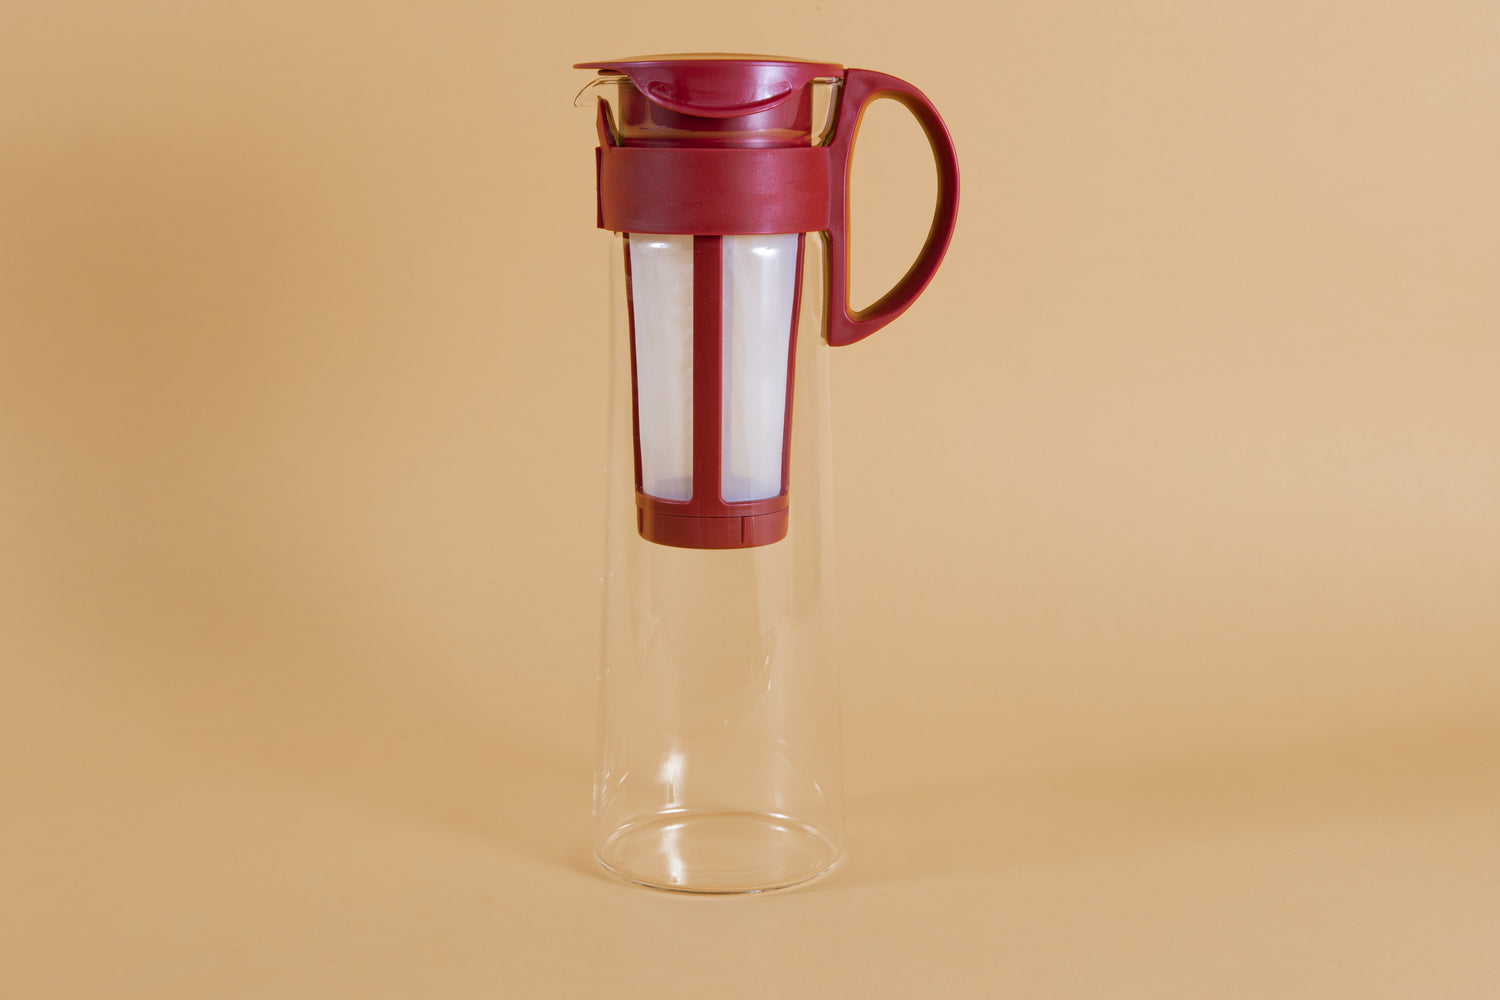 Tall glass server with white nylon mesh coffee filter insert and red plastic handle and lid.